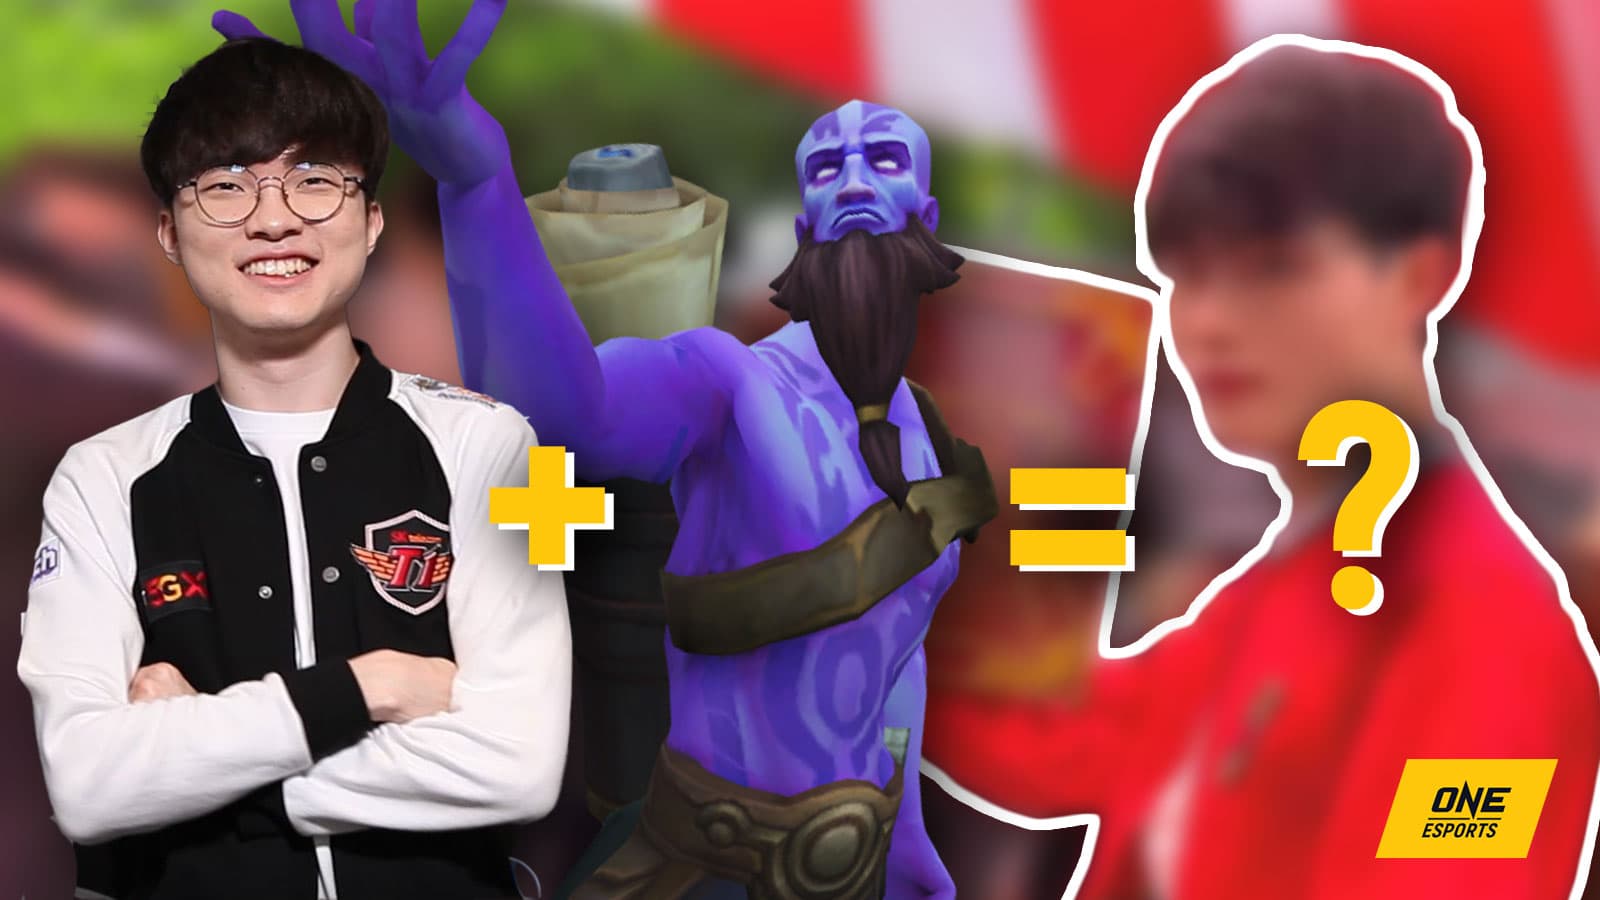 Can you cosplay a real person? Fan does Faker cosplay of Faker cosplaying Ryze - ONE Esports